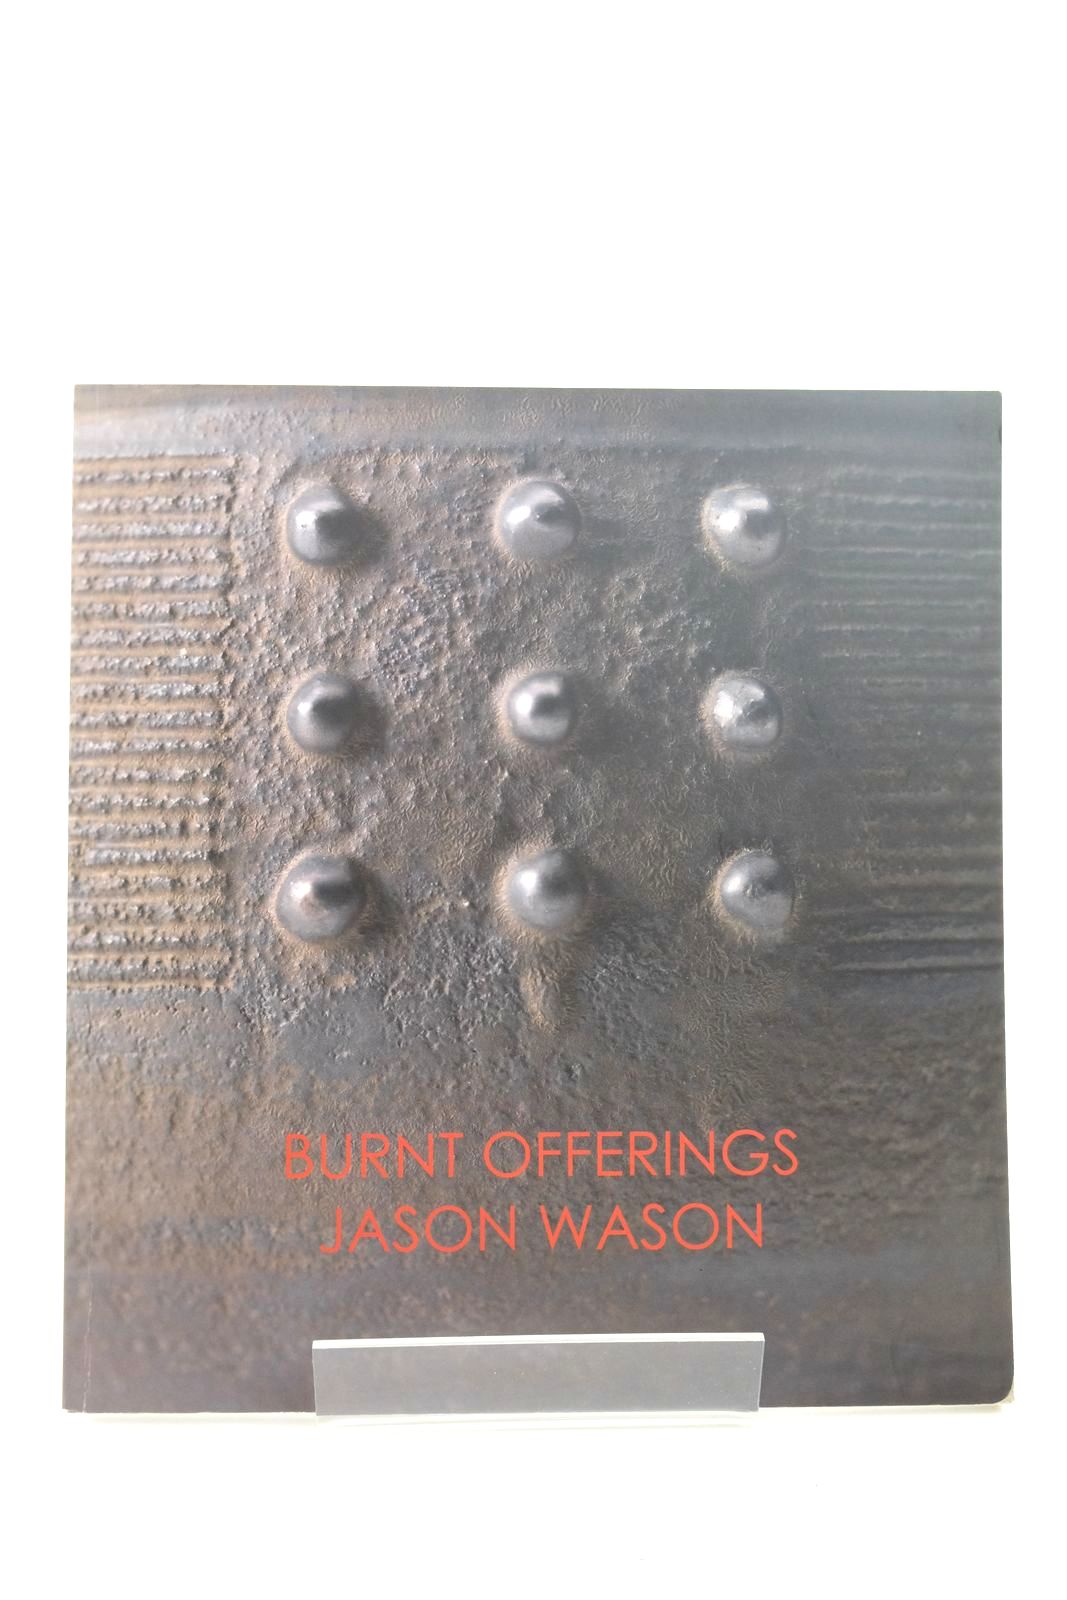 Photo of BURNT OFFERINGS: JASON WASON- Stock Number: 2136612